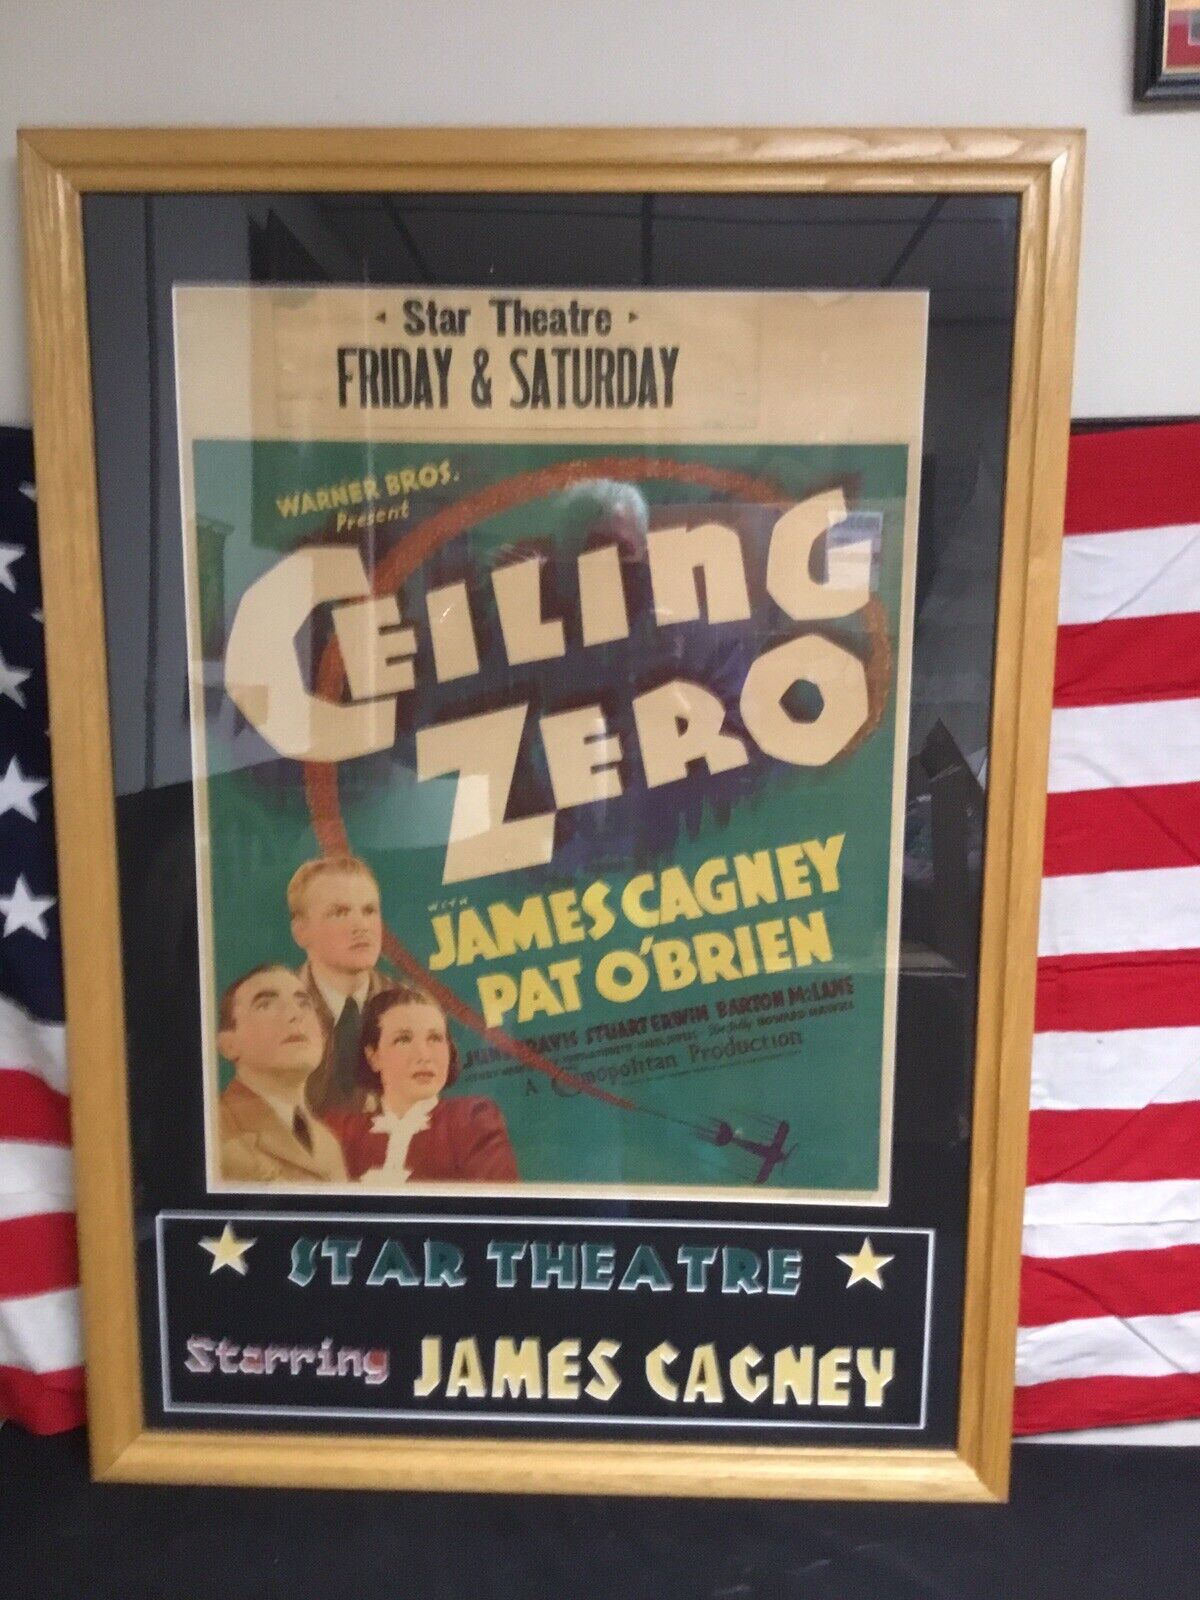 Rare! 1936 Authentic Movie Poster Ceiling Zero James Cagney Framed And Matted.